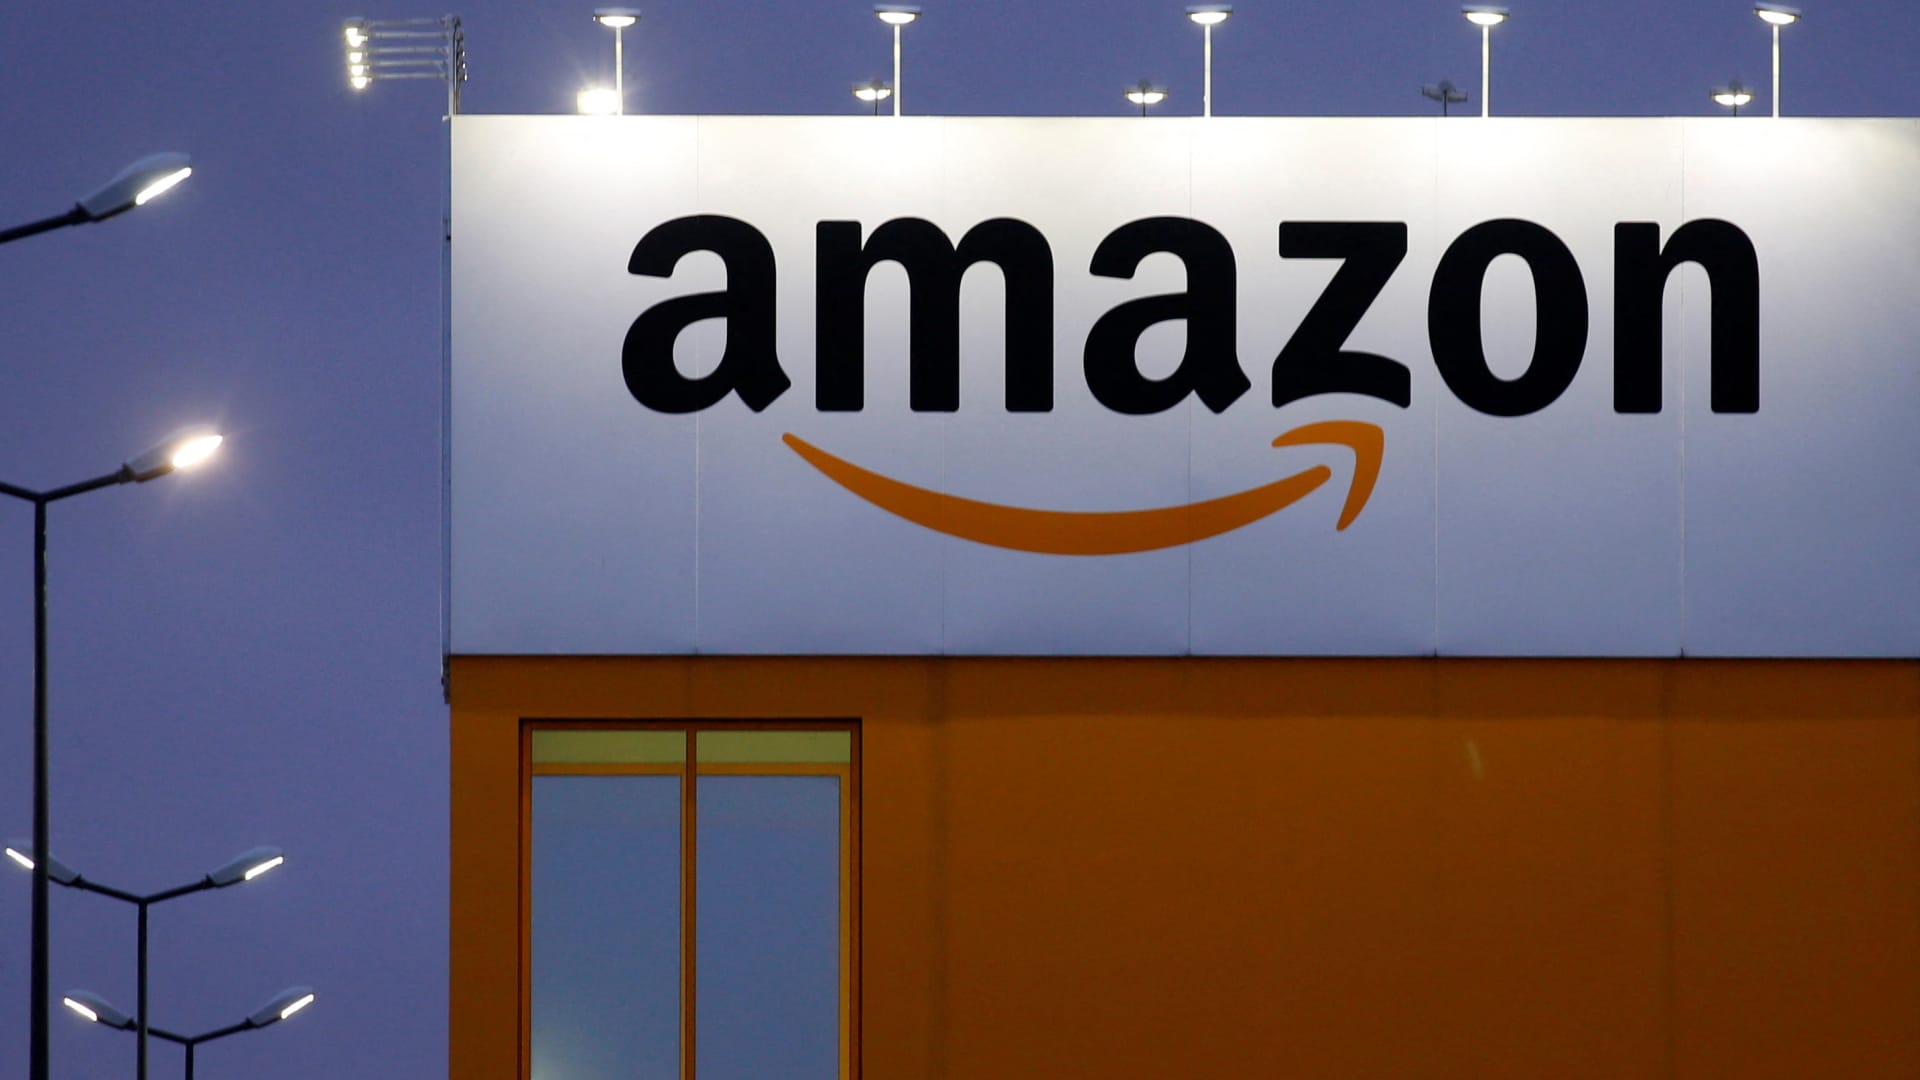 Amazon's advertising business grew 19%, while Google and Meta both deal with slowdowns